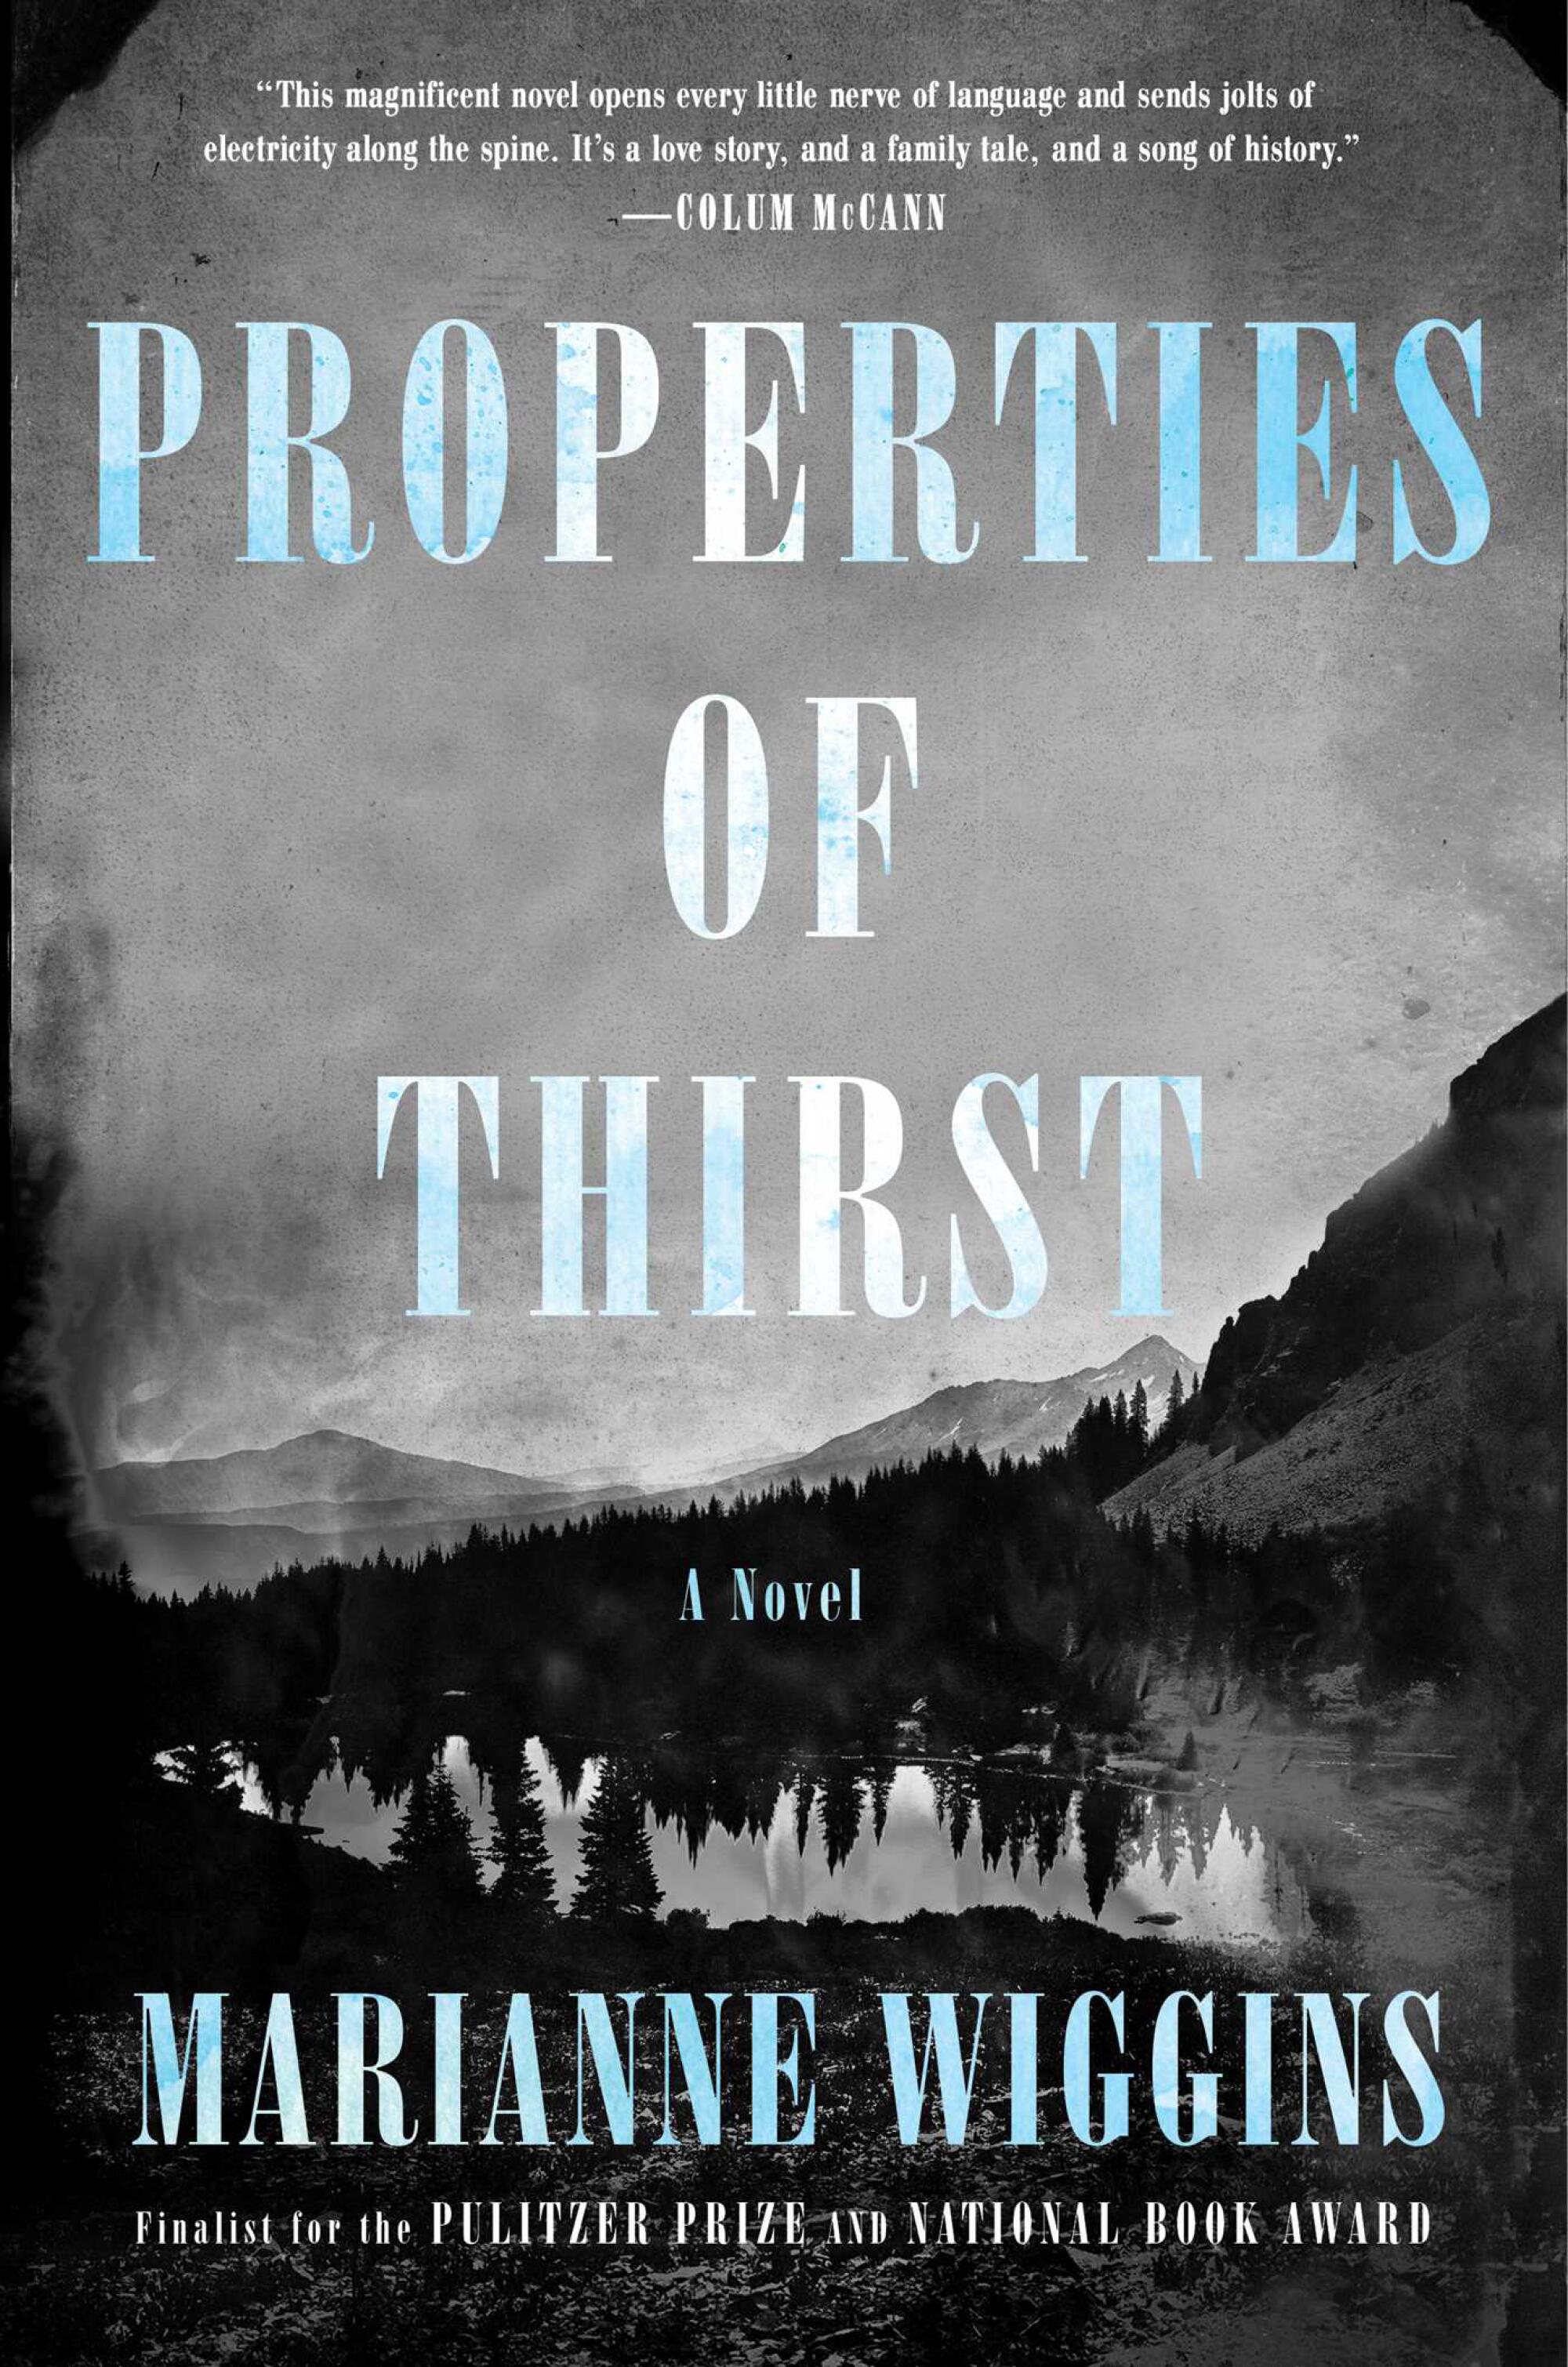 Cover of the book "Properties of Thirst" by Marianne Wiggins